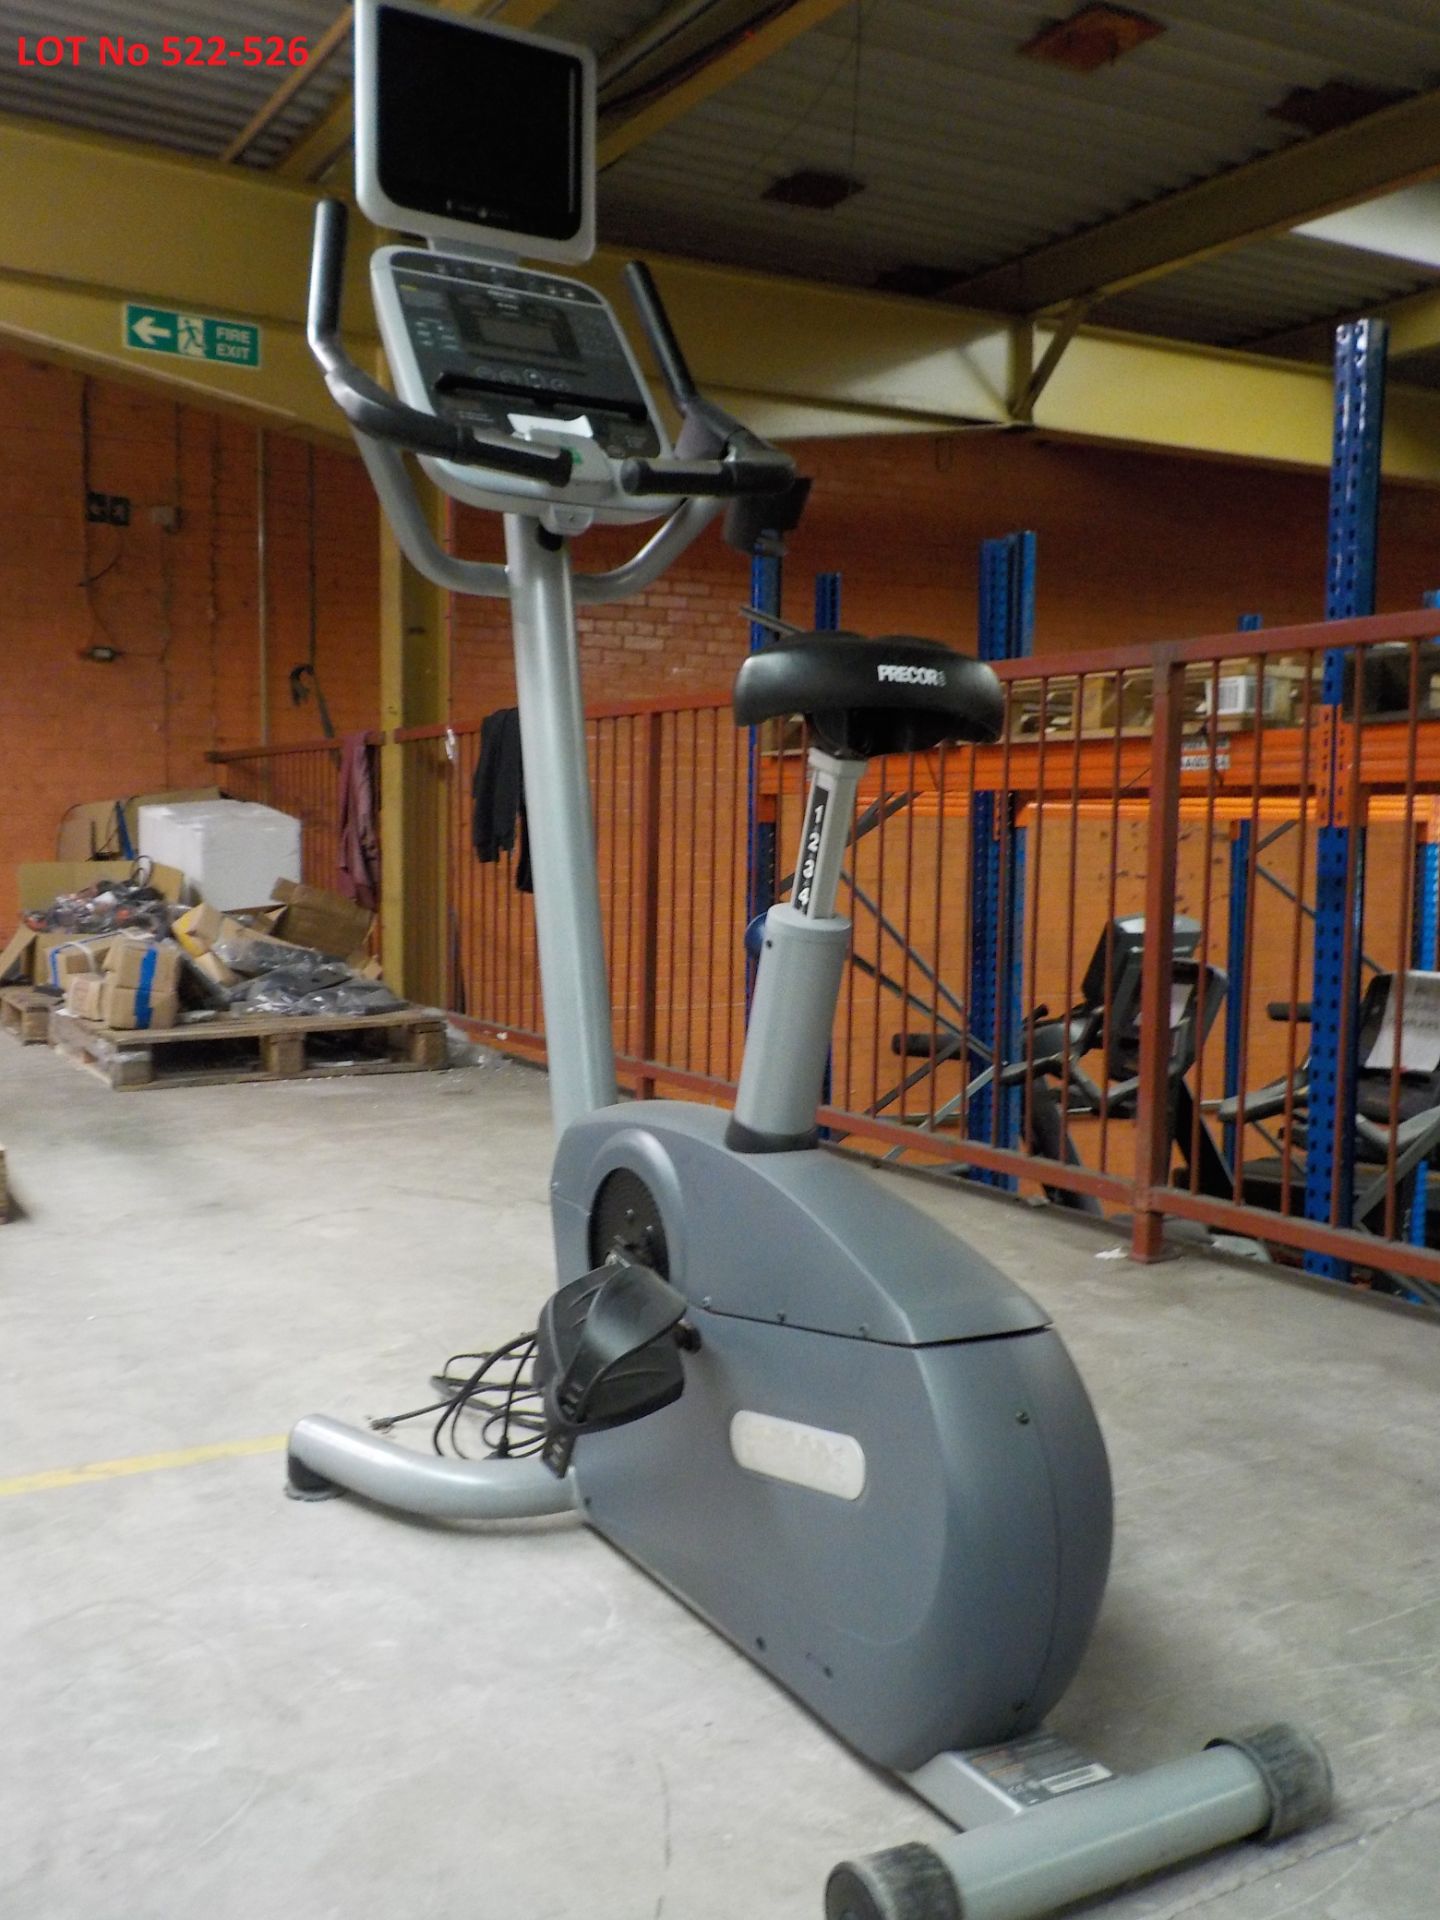 PRECOR UPRIGHT CYCLE - C842i (WITH TV) serial number AGJZJ15090001 *PLEASE NOTE - this lot is to be